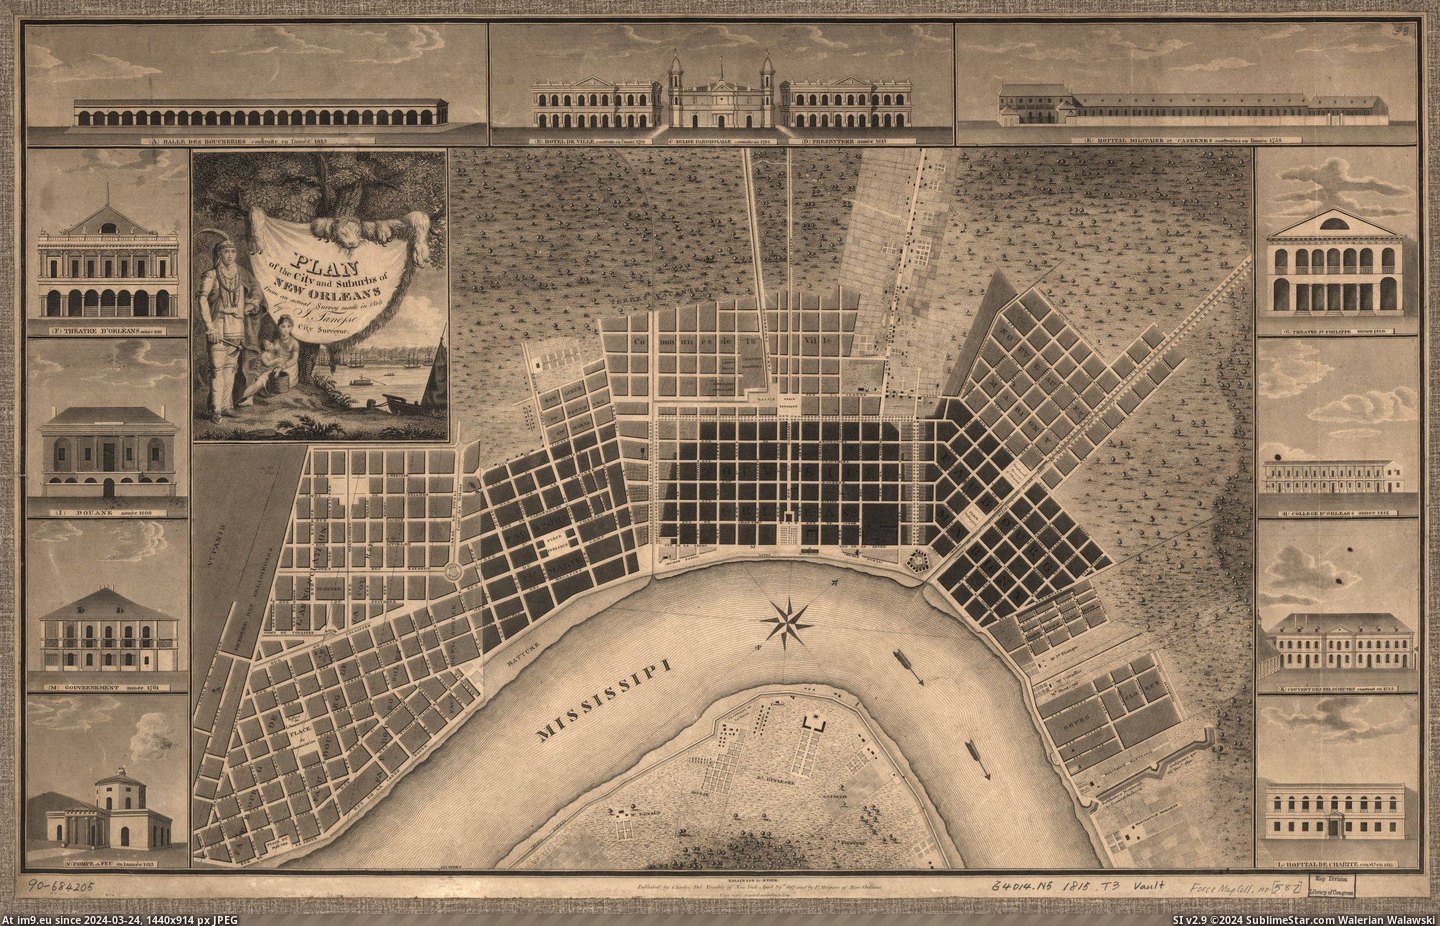 #City #Plan #Suburbs #Survey #Orleans [Mapporn] Plan of the city and suburbs of New Orleans from an 1815 survey [2,344 x 1,500] Pic. (Image of album My r/MAPS favs))